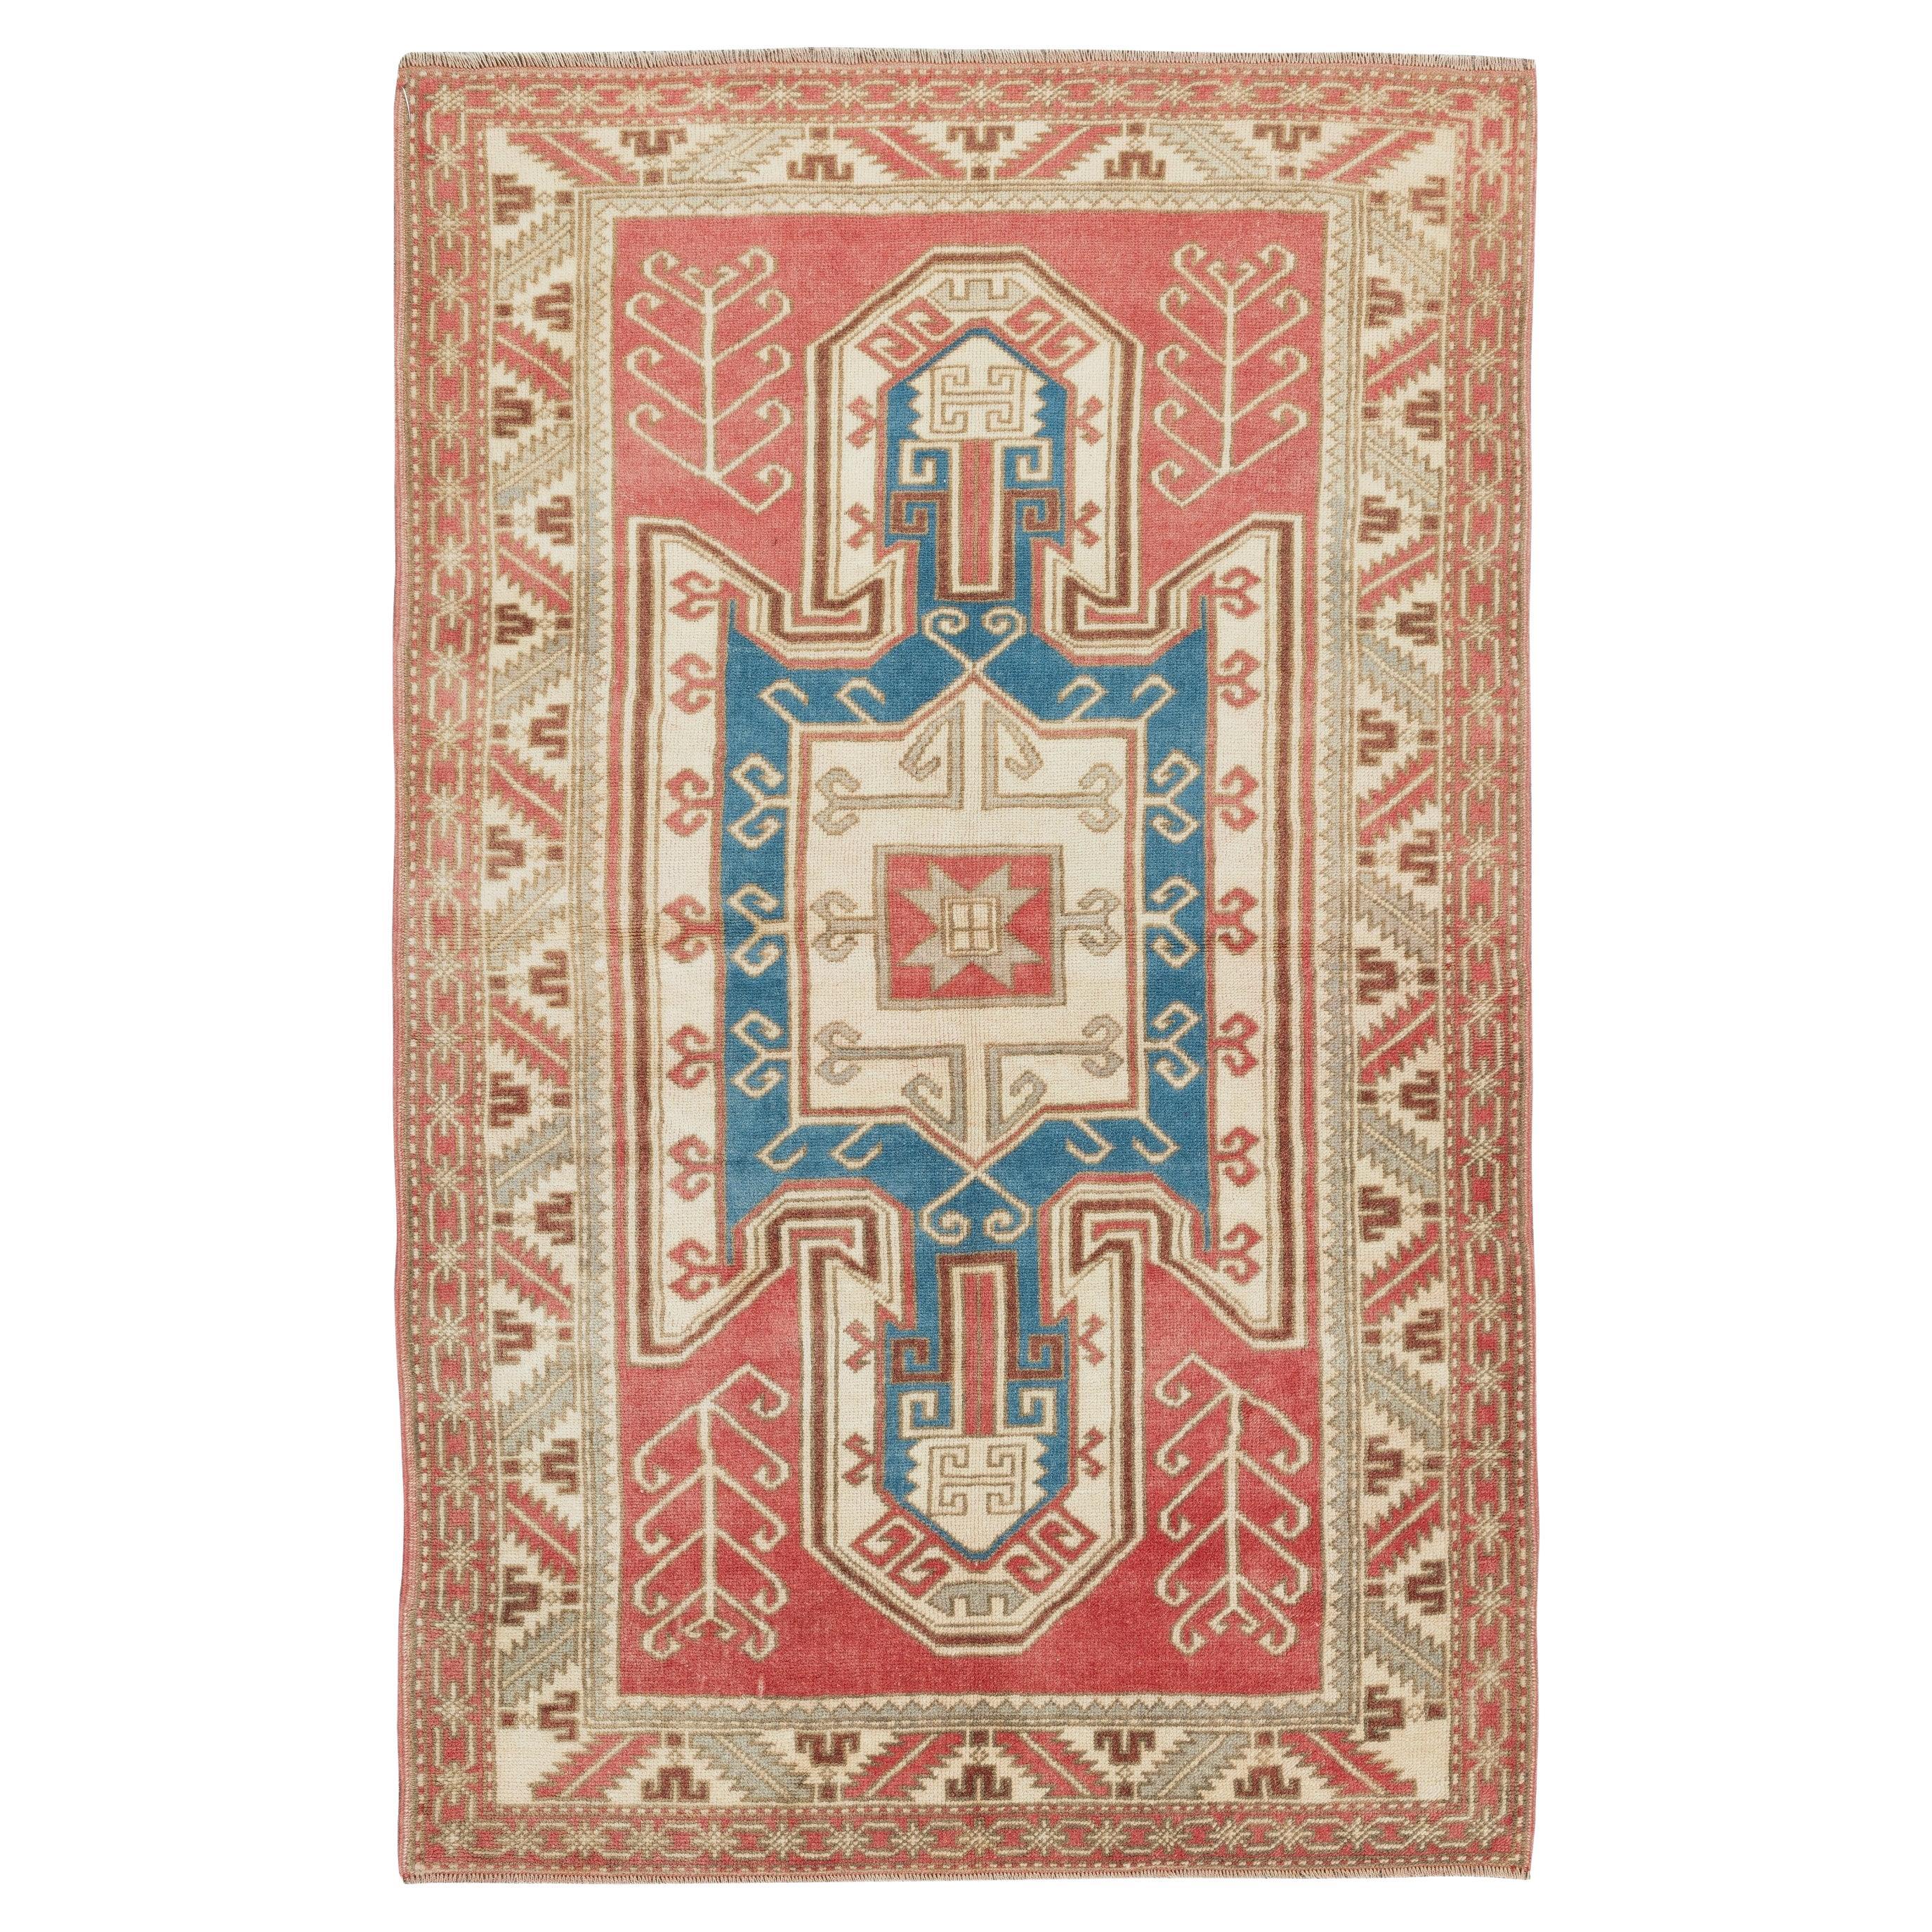 3.8x6 Ft Mid-Century Hand Knotted Geometric Turkish Wool Rug in Red, Blue & Beige